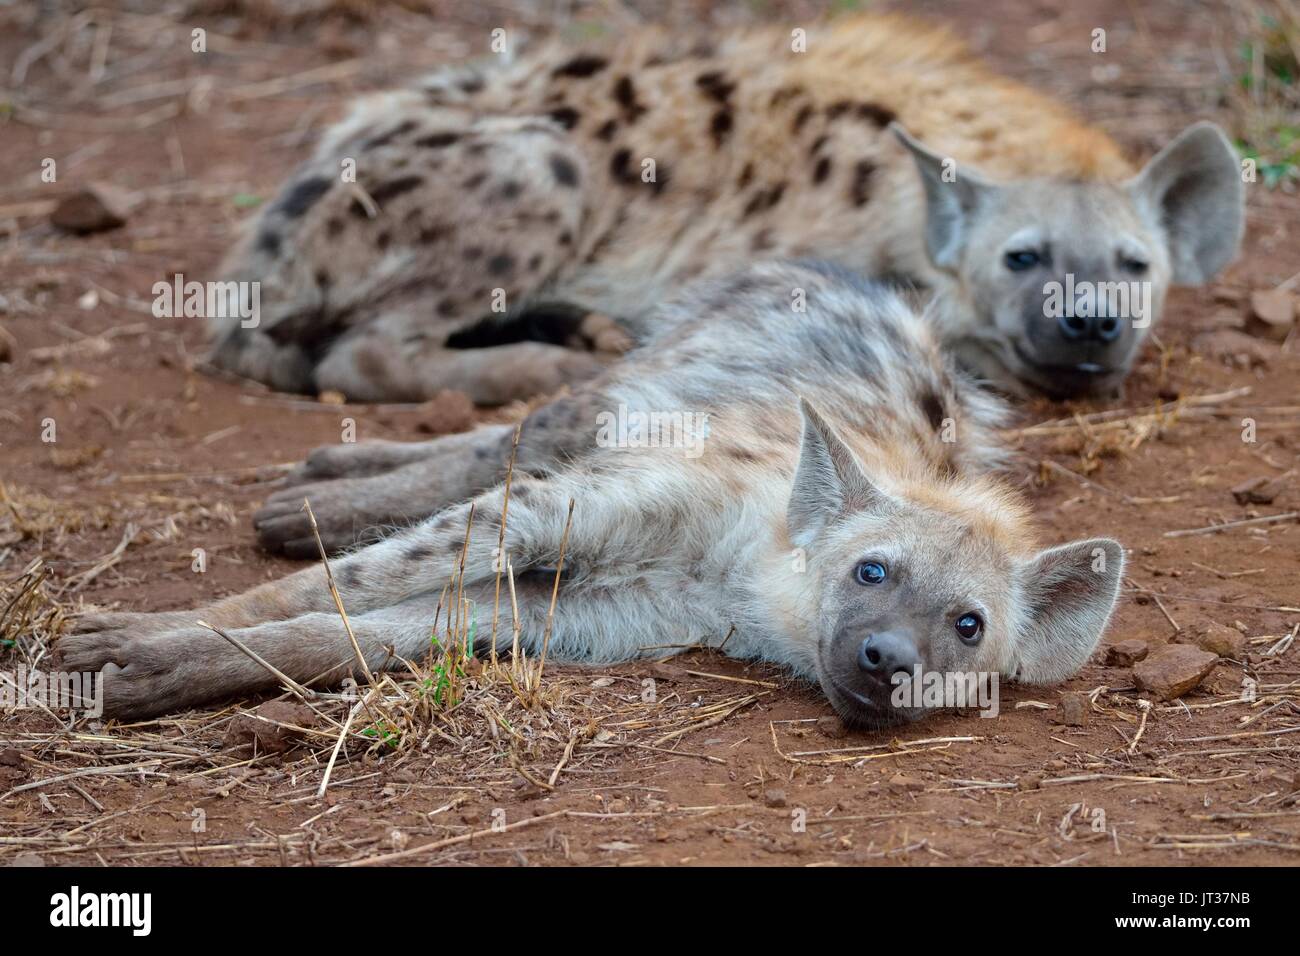 Spotted hyenas or Laughing hyenas (Crocuta crocuta) resting, Kruger National Park, South Africa, Africa Stock Photo